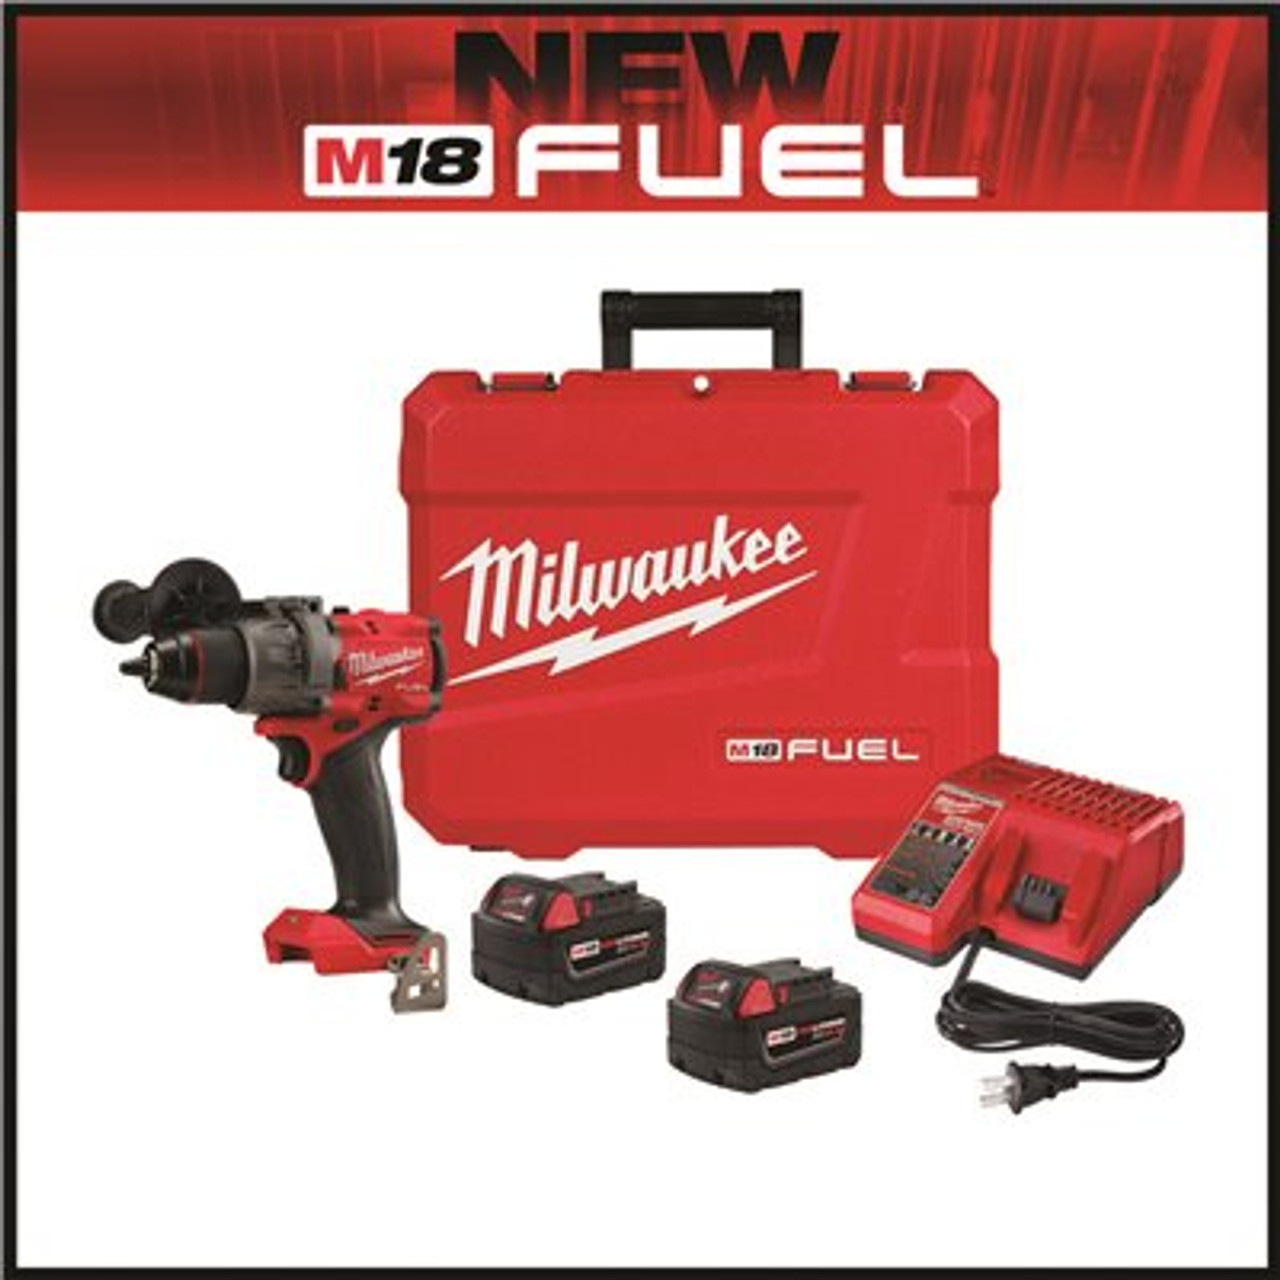 Milwaukee M18 FUEL 18V Lithium-Ion Brushless Cordless 1/2 in. Drill/Driver Kit W/(2) 5.0Ah Batteries, Charger, and Hard Case